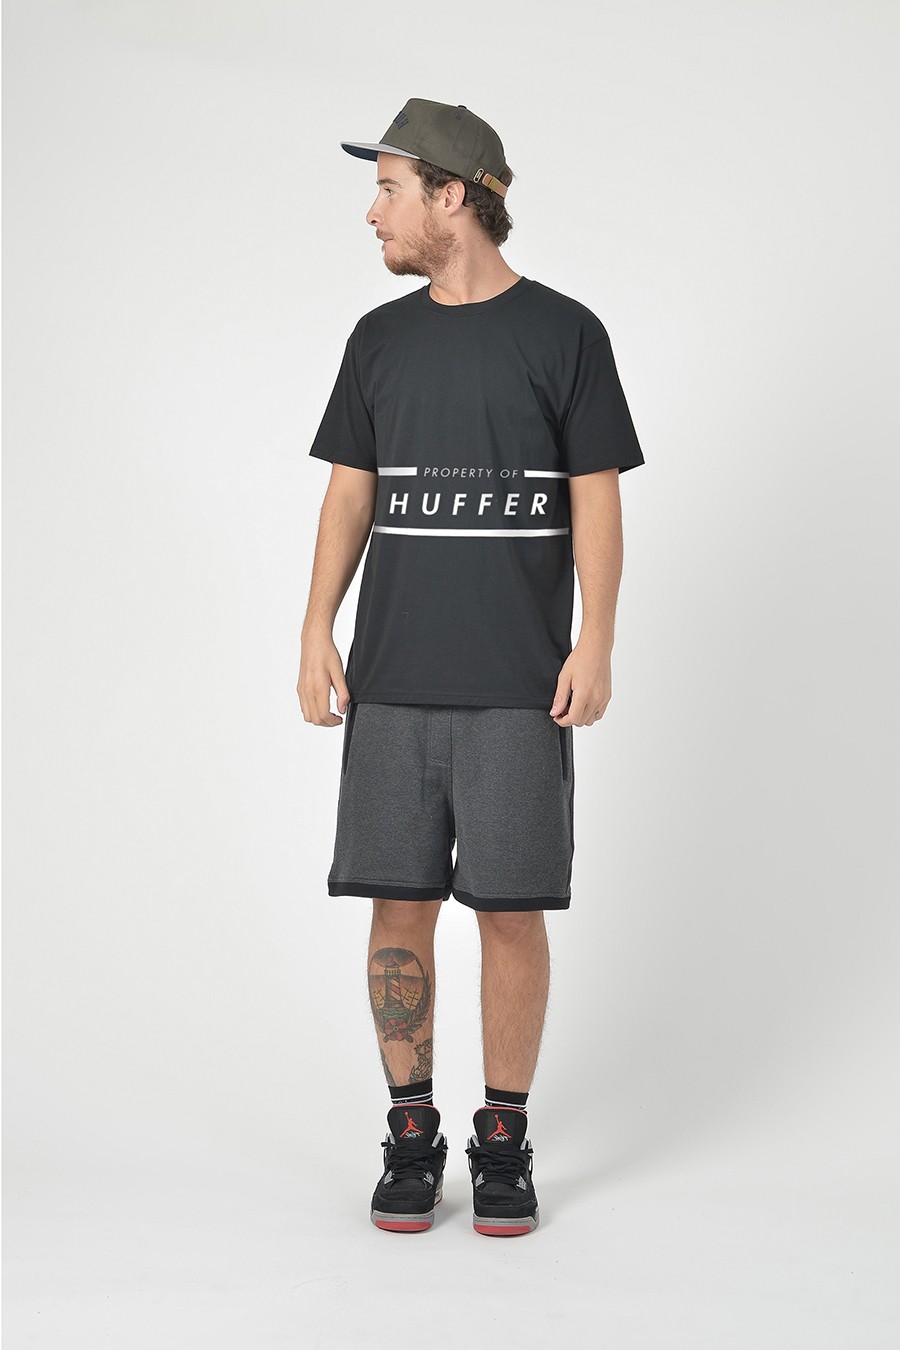 Introducing The Huffer Summer '14 Collection…